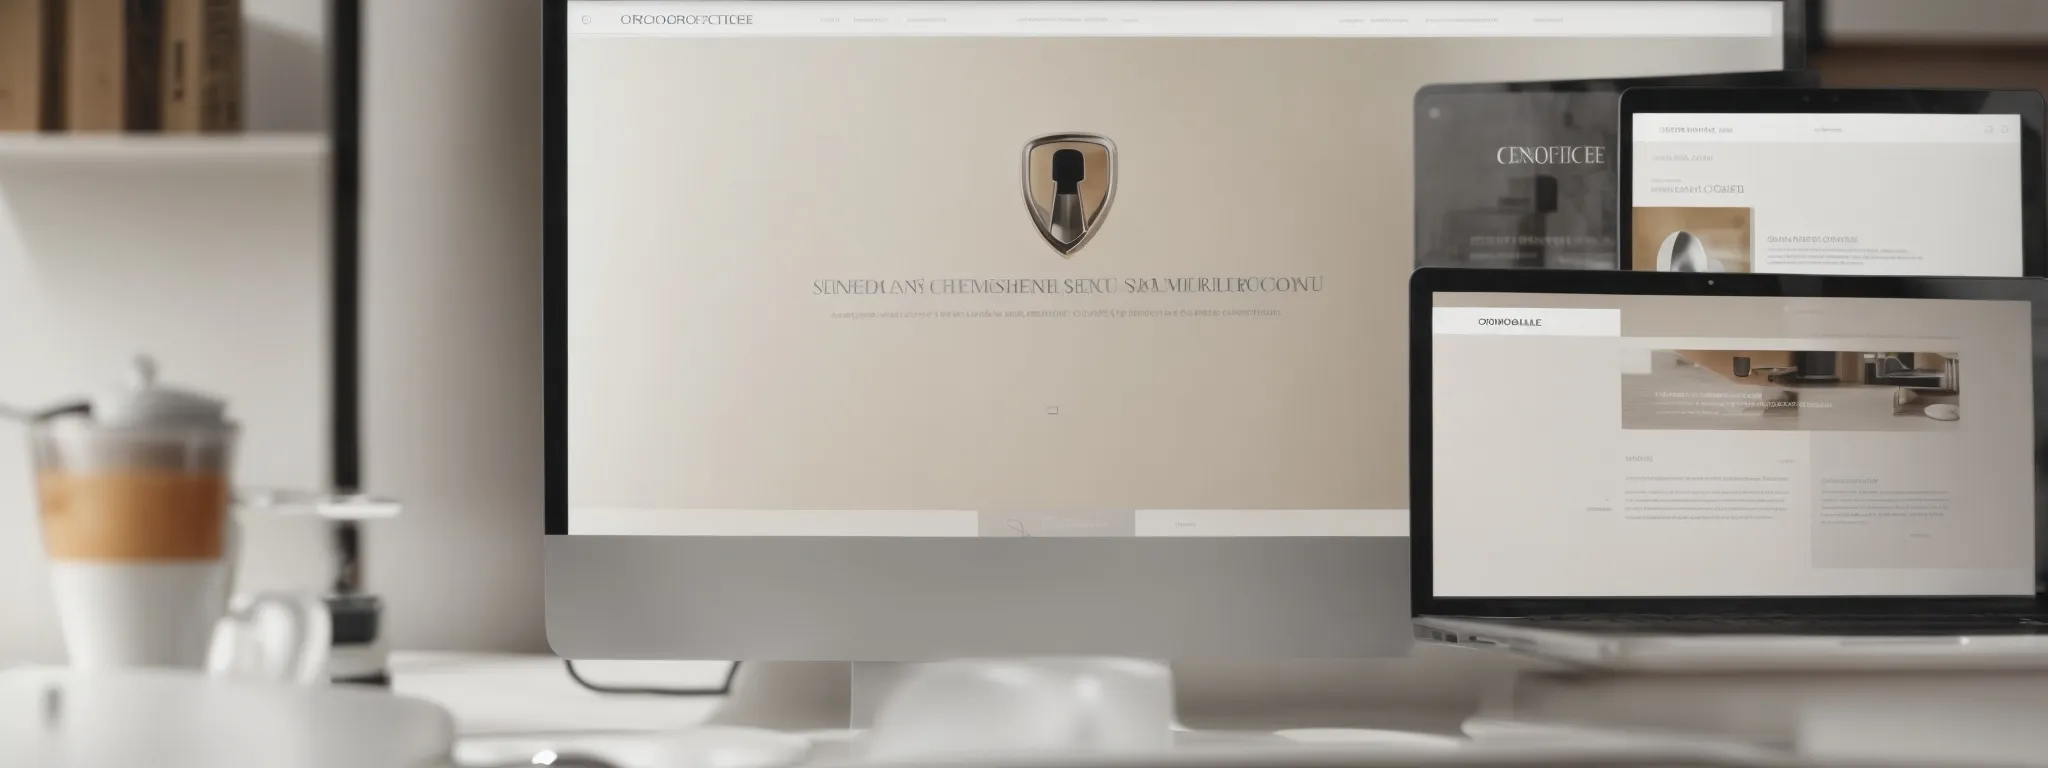 a computer screen displays a sophisticated orthopedic clinic website with a clear menu structure and secure padlock icon in the browser bar.